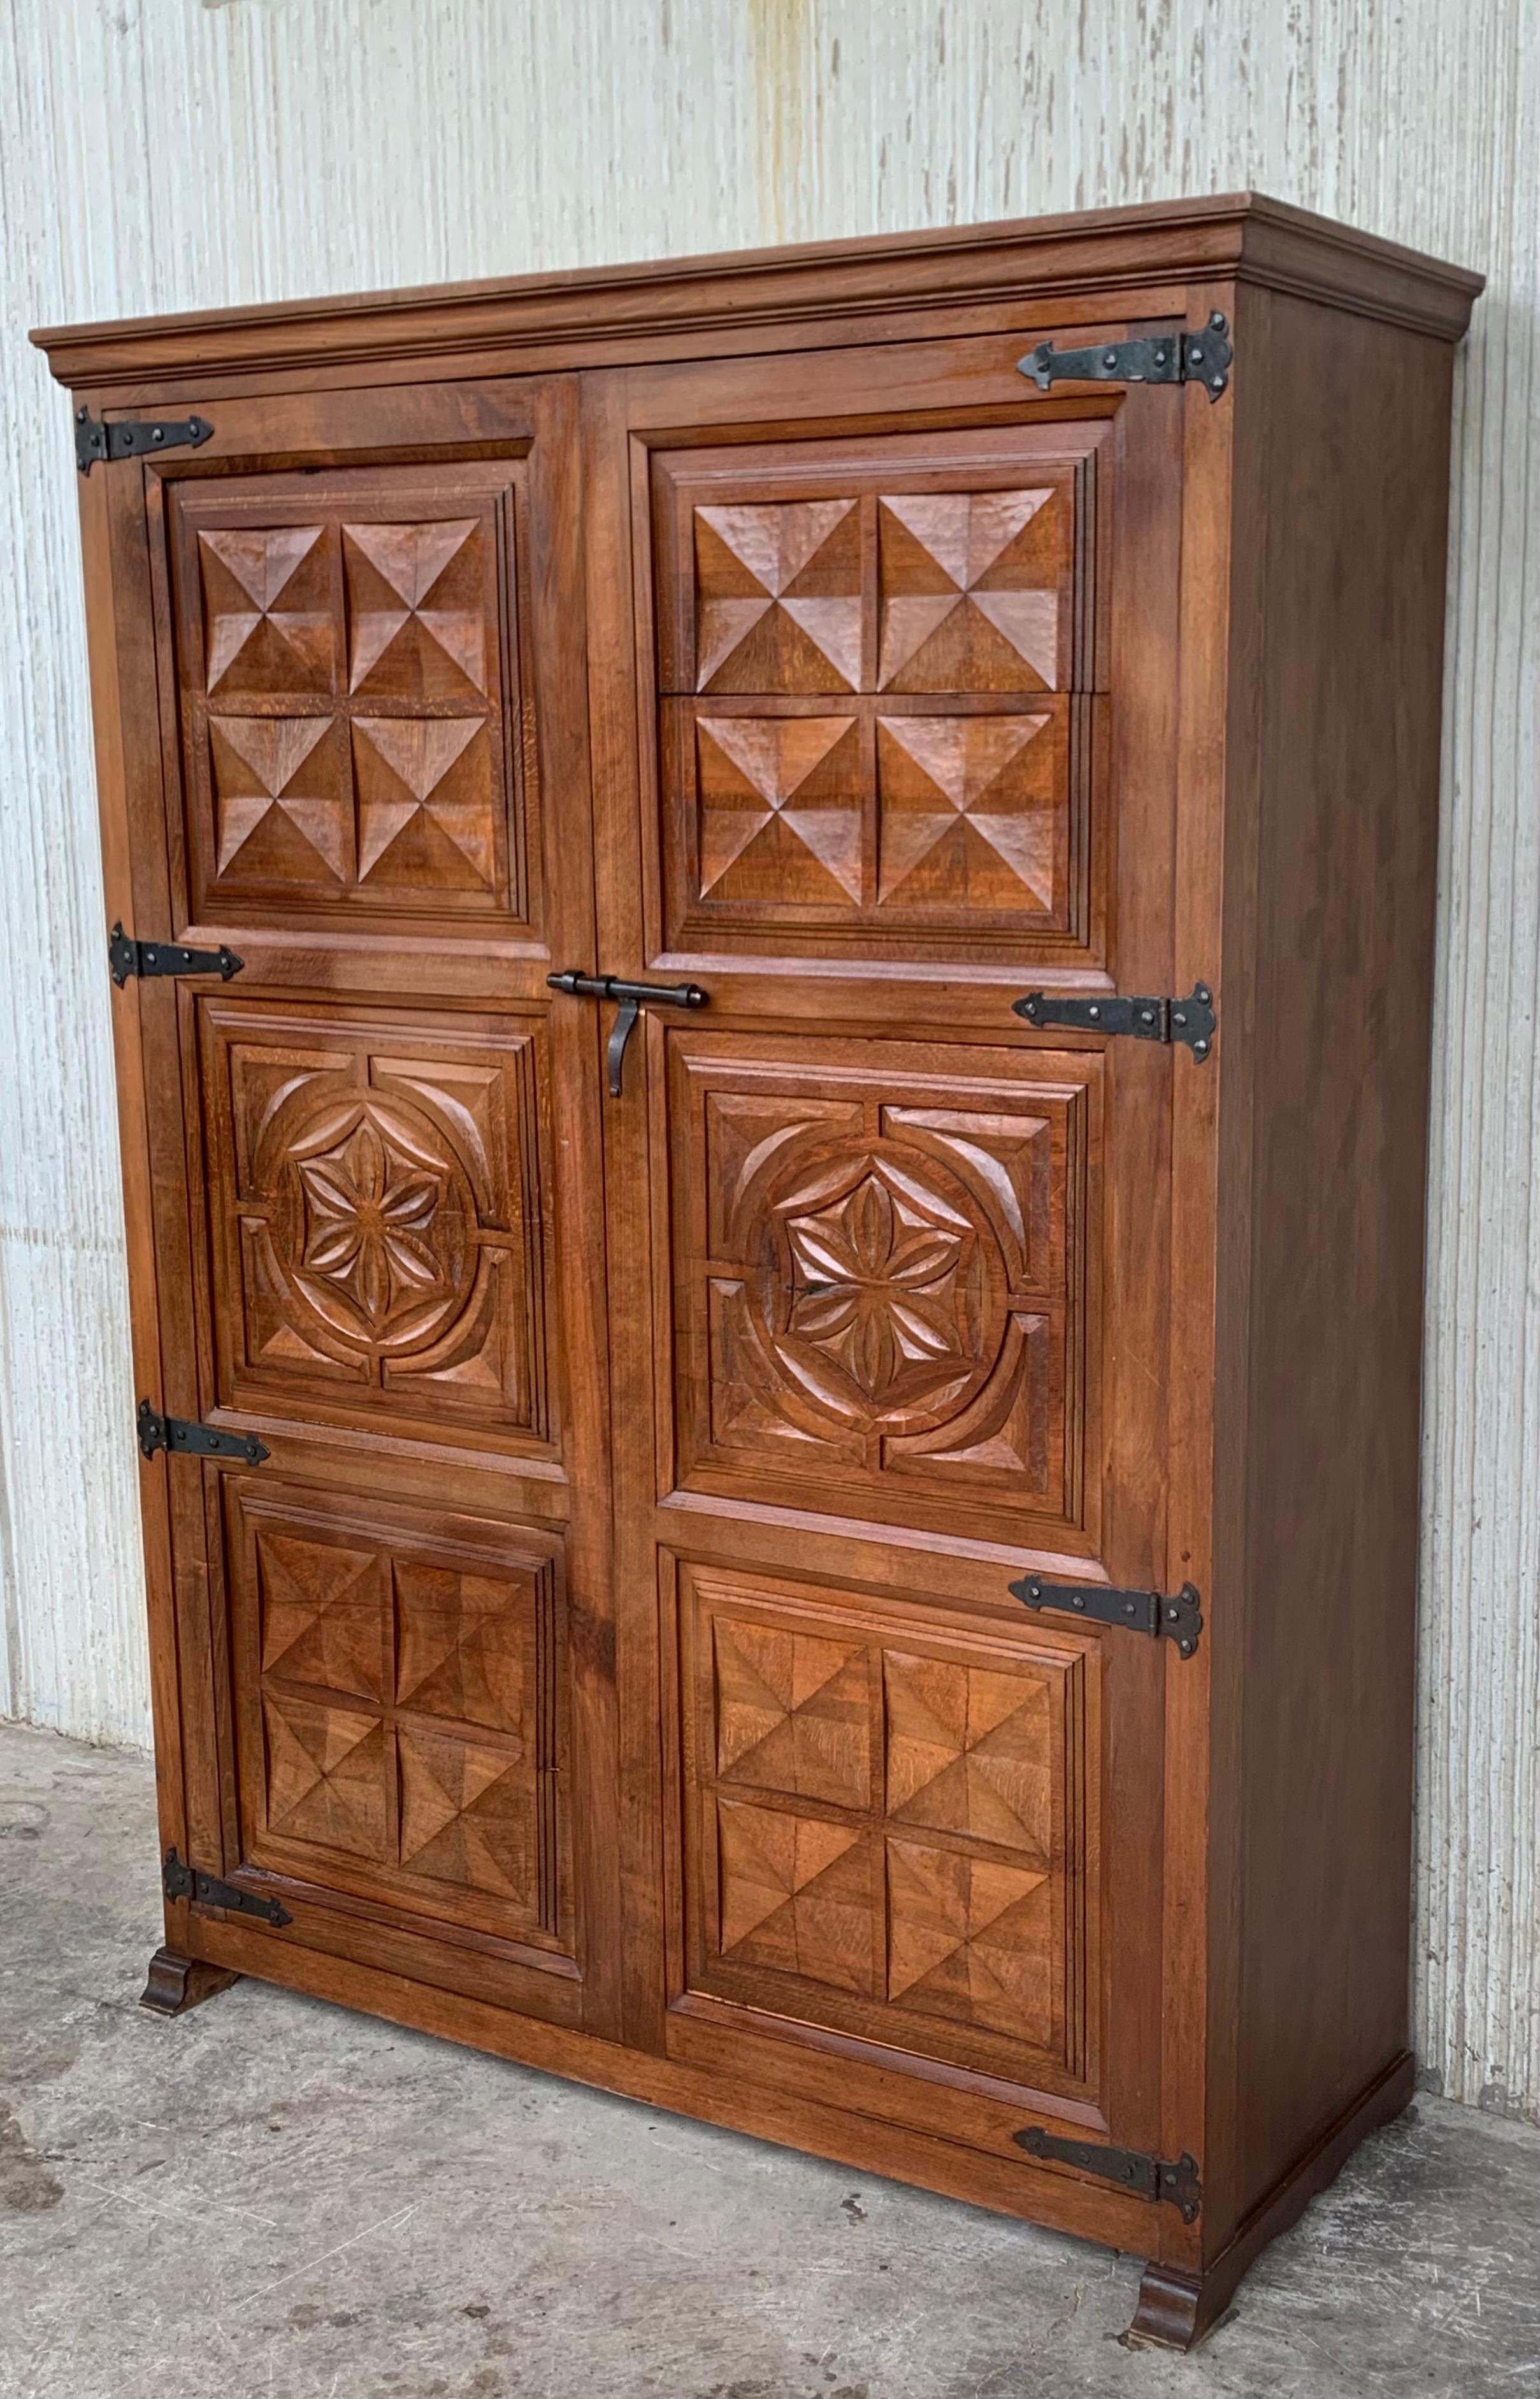 Armoire, cupboard or kitchen cabinet with two doors decorated to the outside with geometric patterns framed by moldings. The legs that protrude below and the cresting and lower molding provide the characteristic curved lines in this period. The